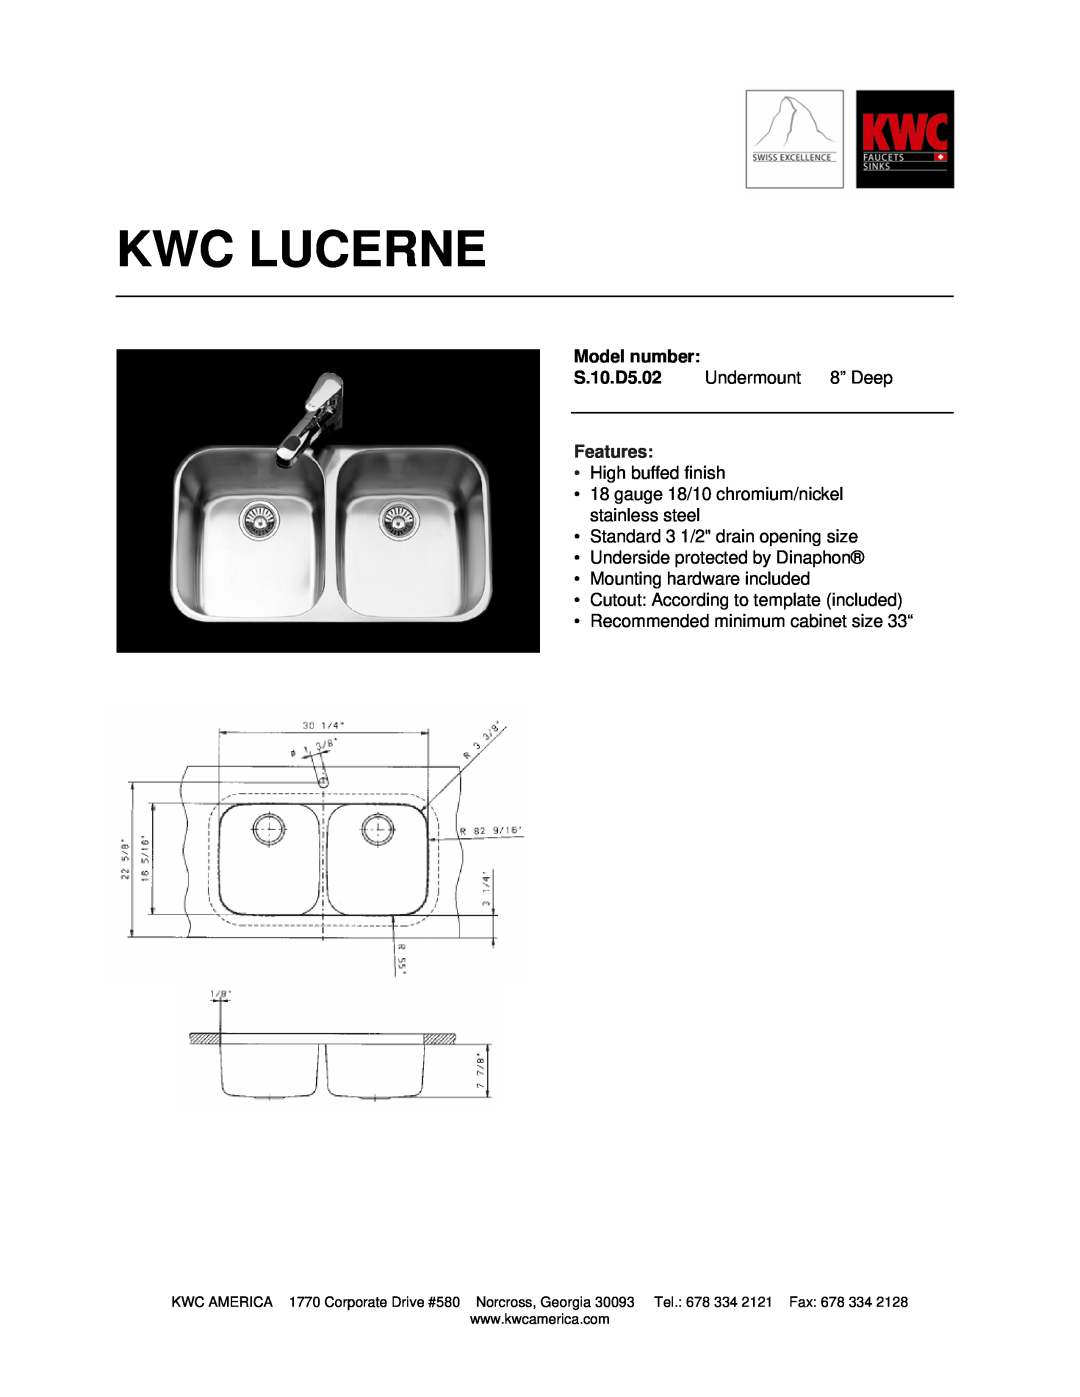 KWC S.10.D5.02 manual Kwc Lucerne, Model number, Features 